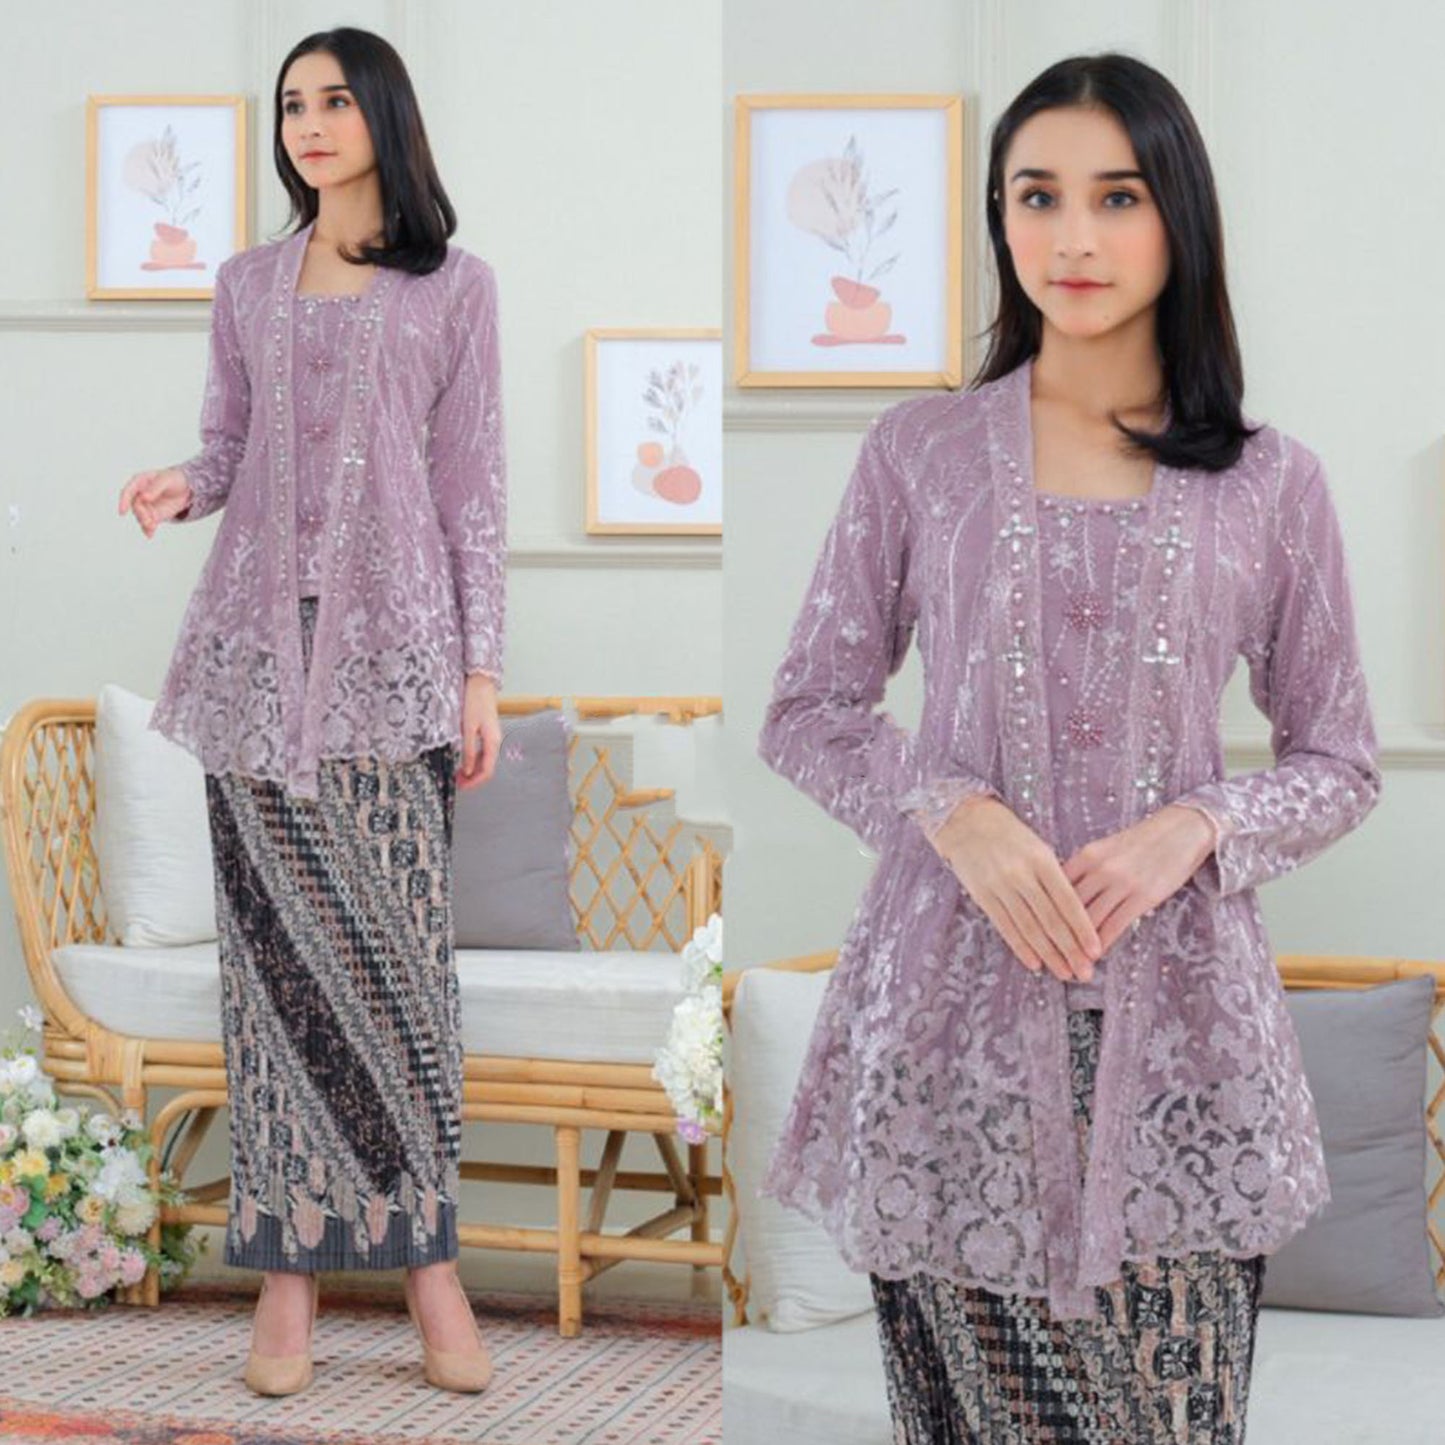 Elegant Women's New Kebaya Set with Pearl Sequins and Full Embroidery Detailing